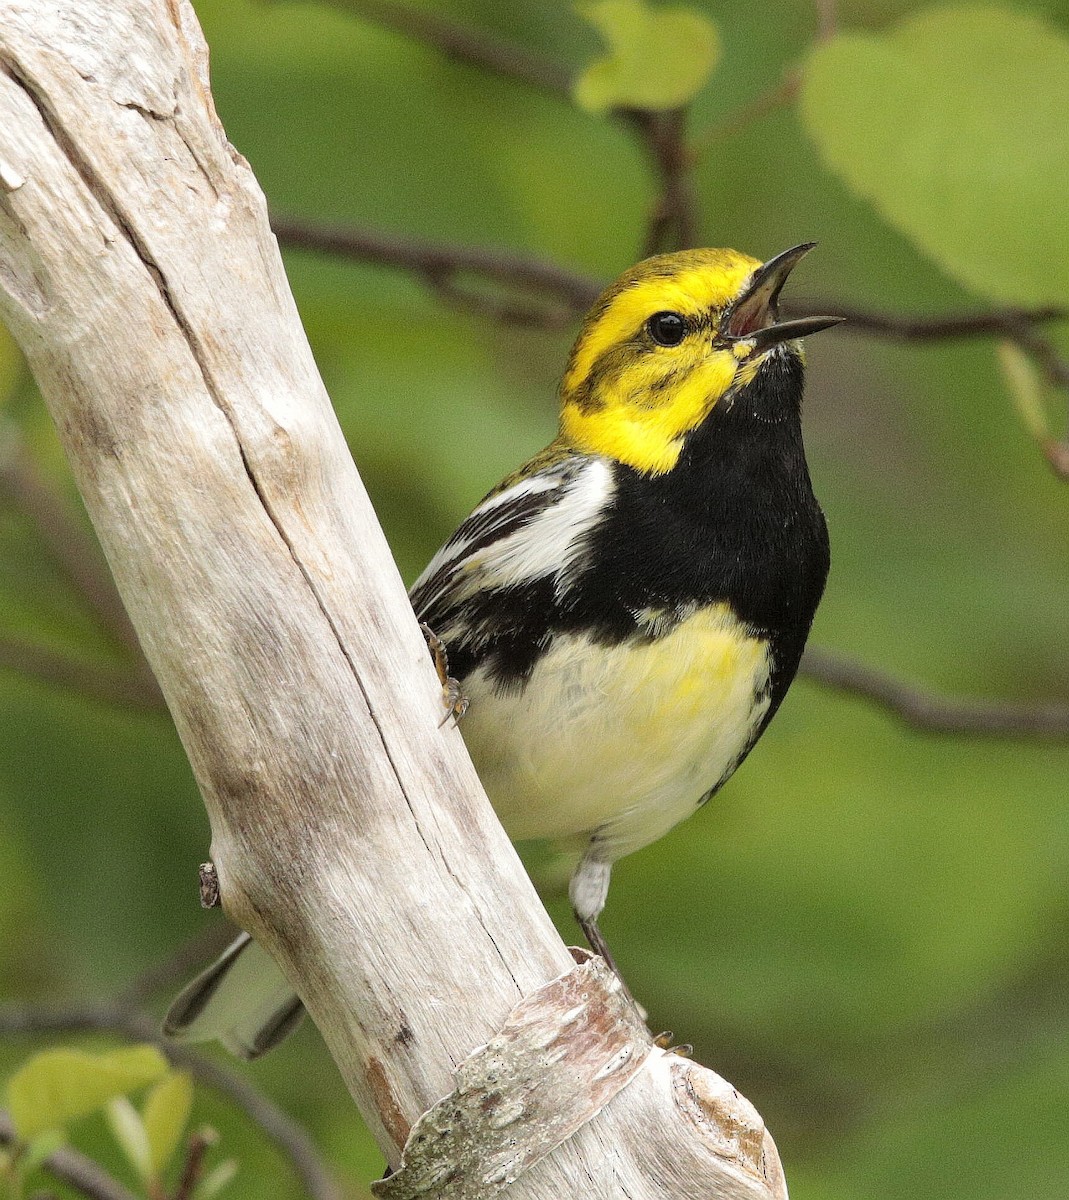 Black-throated Green Warbler - Charles Fitzpatrick